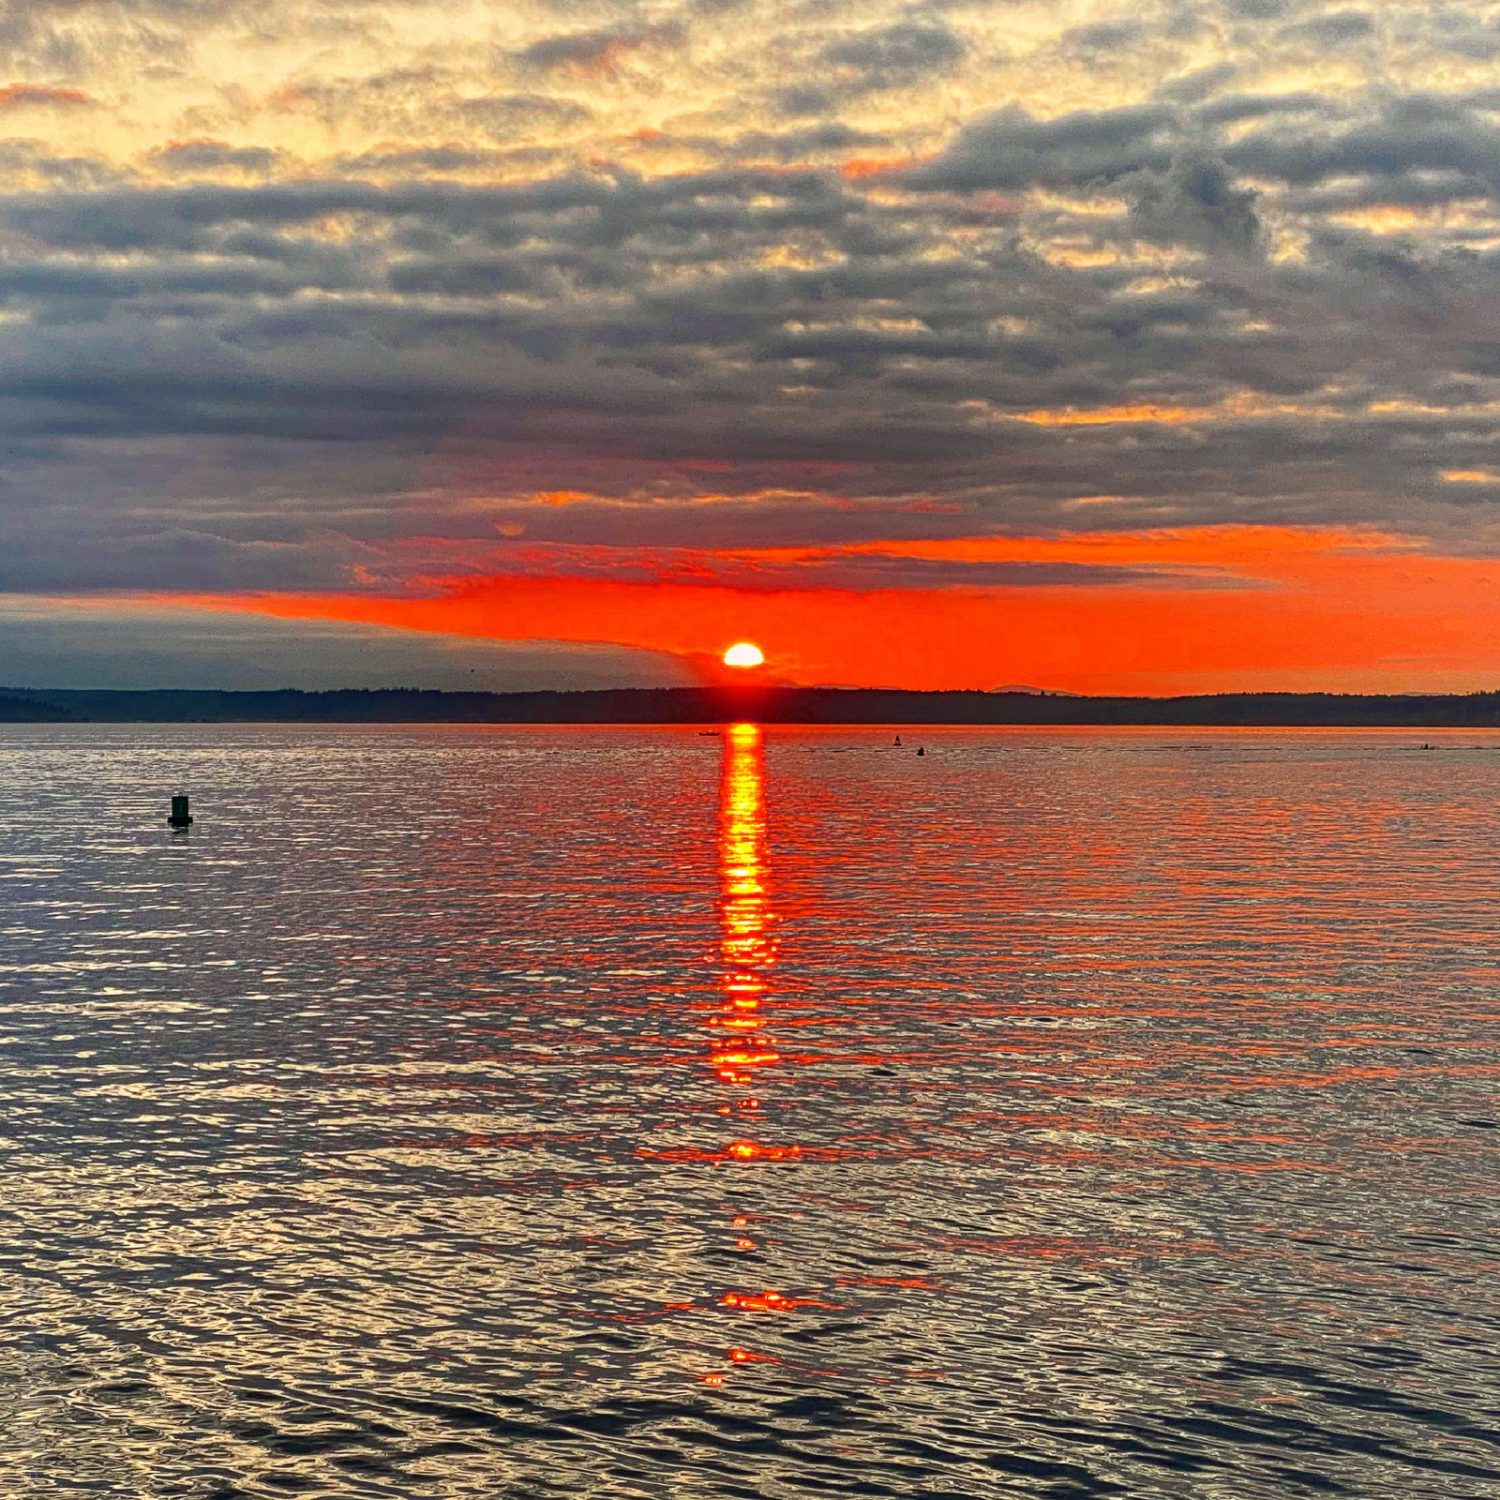 THE place to see sunsets in Seattle...